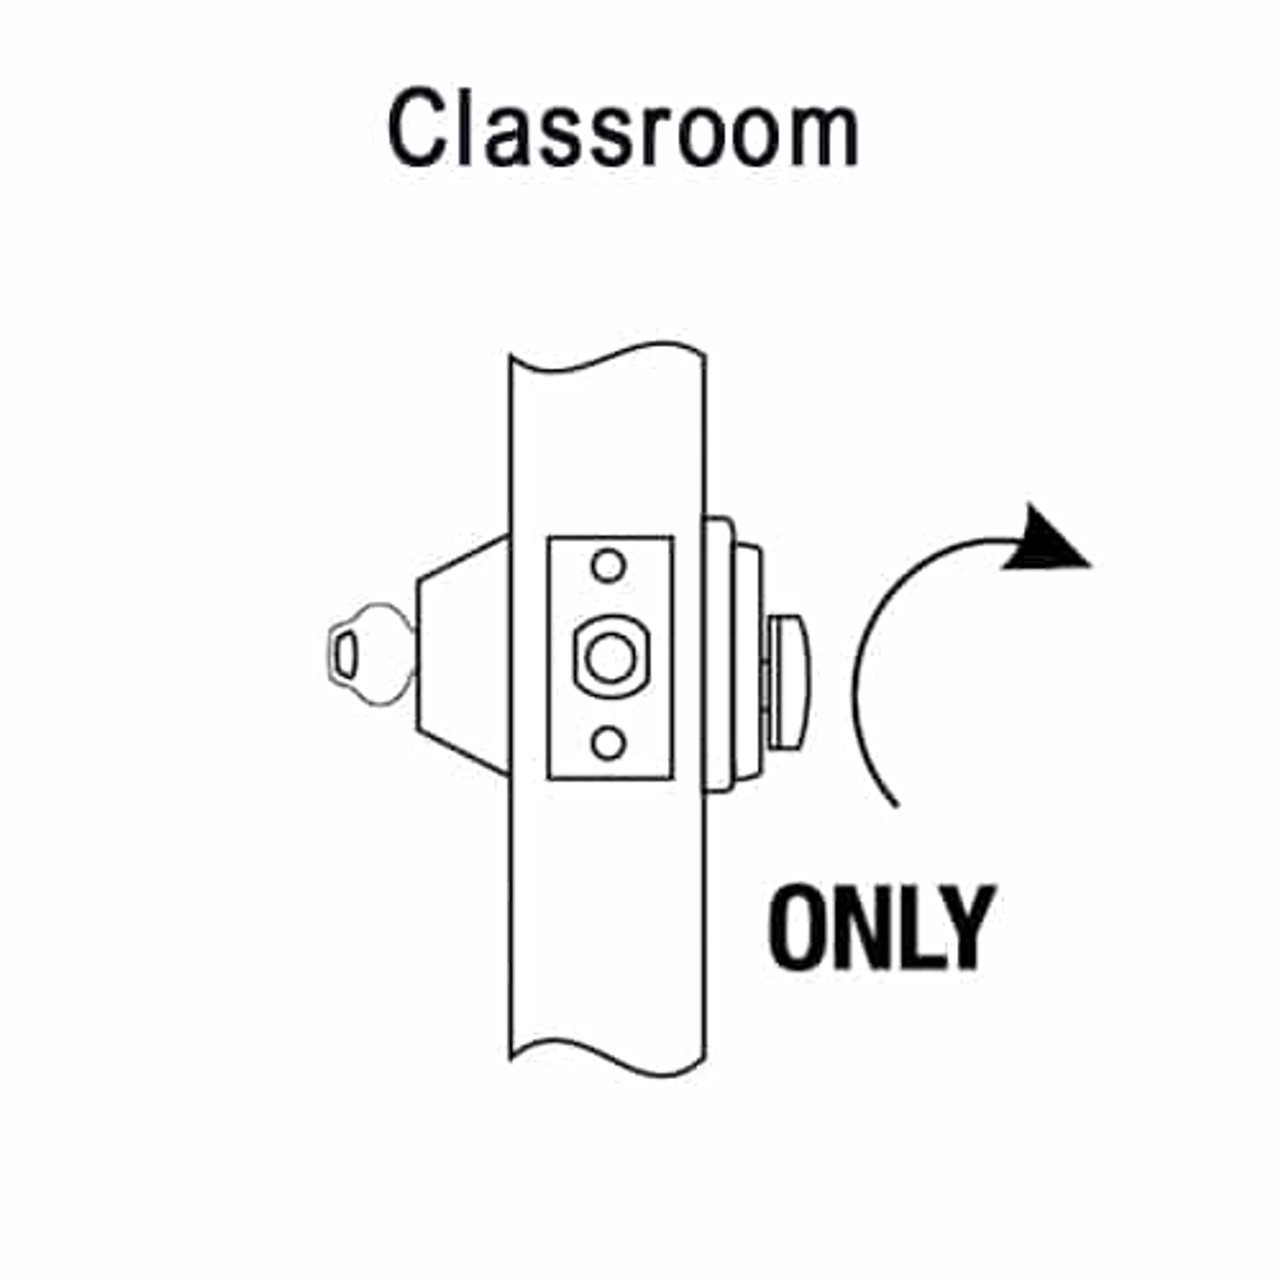 DL3017-618-LH-LC Corbin DL3000 Series Classroom Cylindrical Deadlocks with Single Cylinder in Bright Nickel